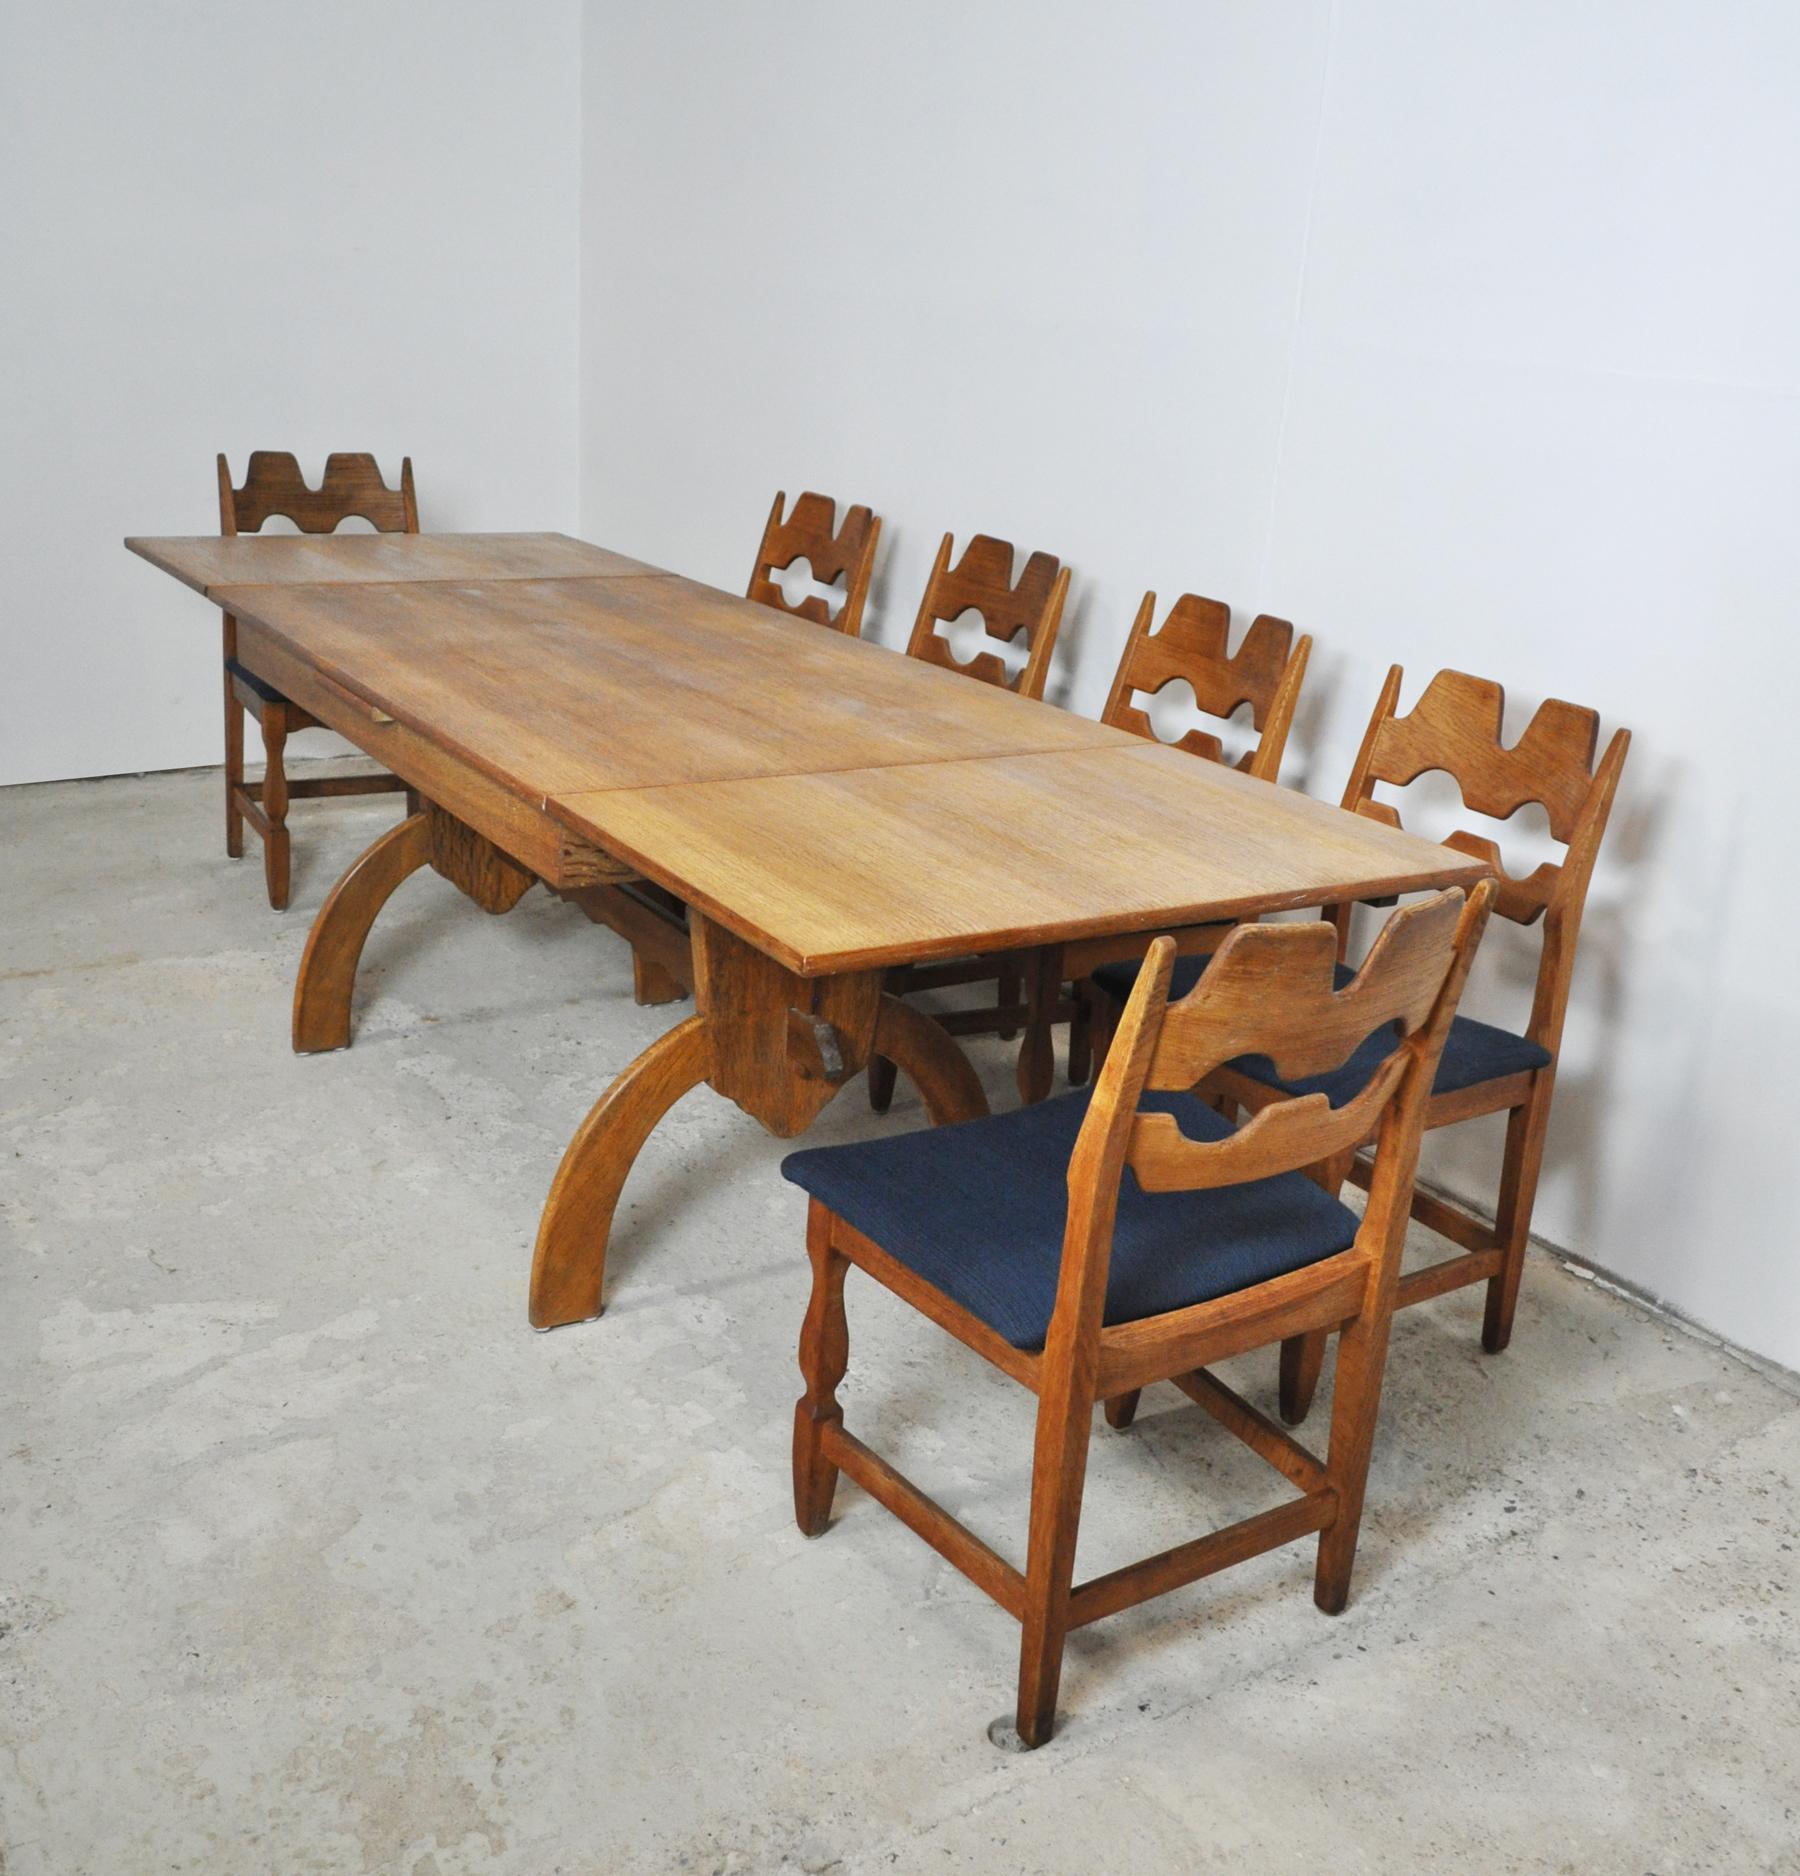 Dining room set designed by Henning Kjærnulf for EG Kvalitetsmøbel, made of solid oak and veneer. Table with a gorgeous grain and two expandable leaves. 6 dining chairs made of solid oak and new upholstery with dark blue wool fabric.
12 dining